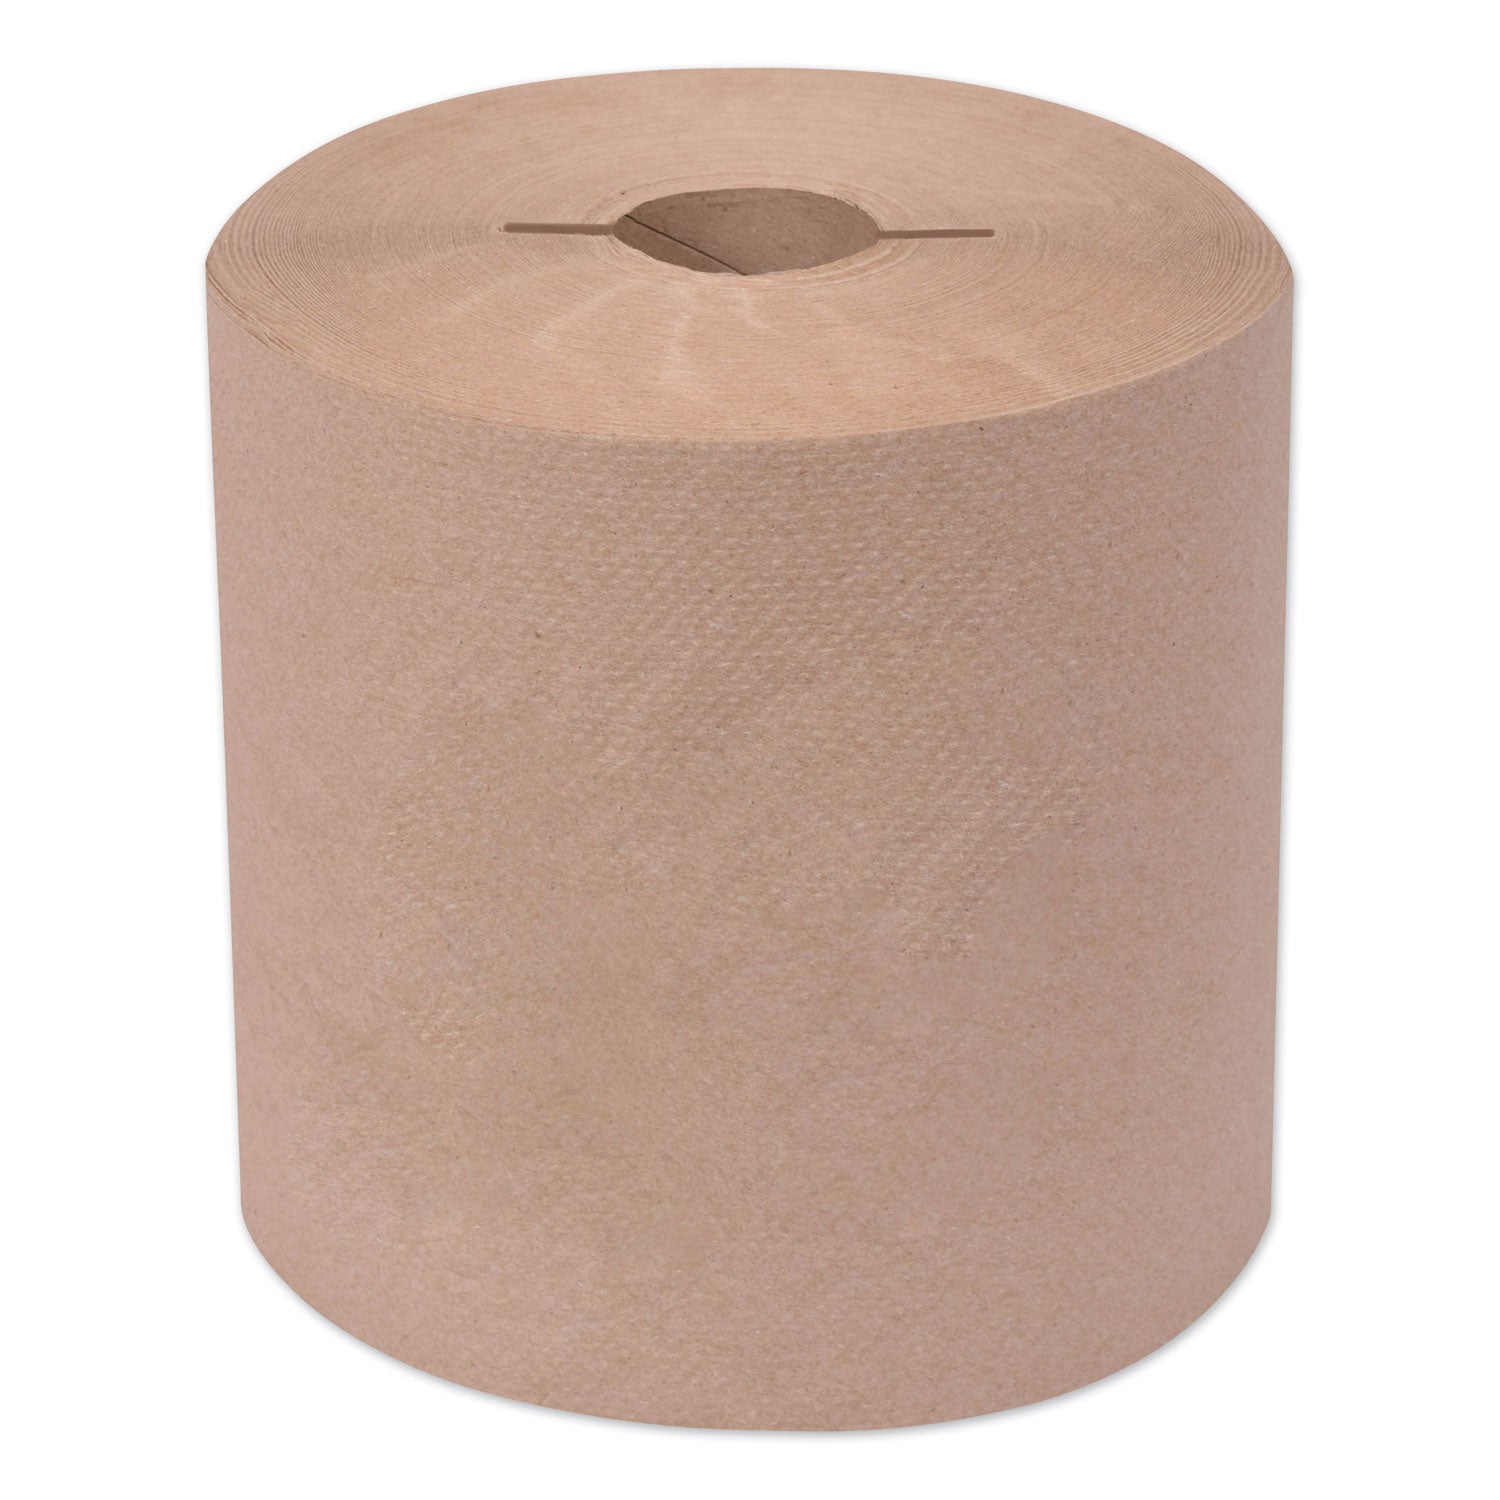 universal-hand-towel-roll-notched-1-ply-75-x-1000-ft-natural-6-rolls-carton_trk7171020 - 1